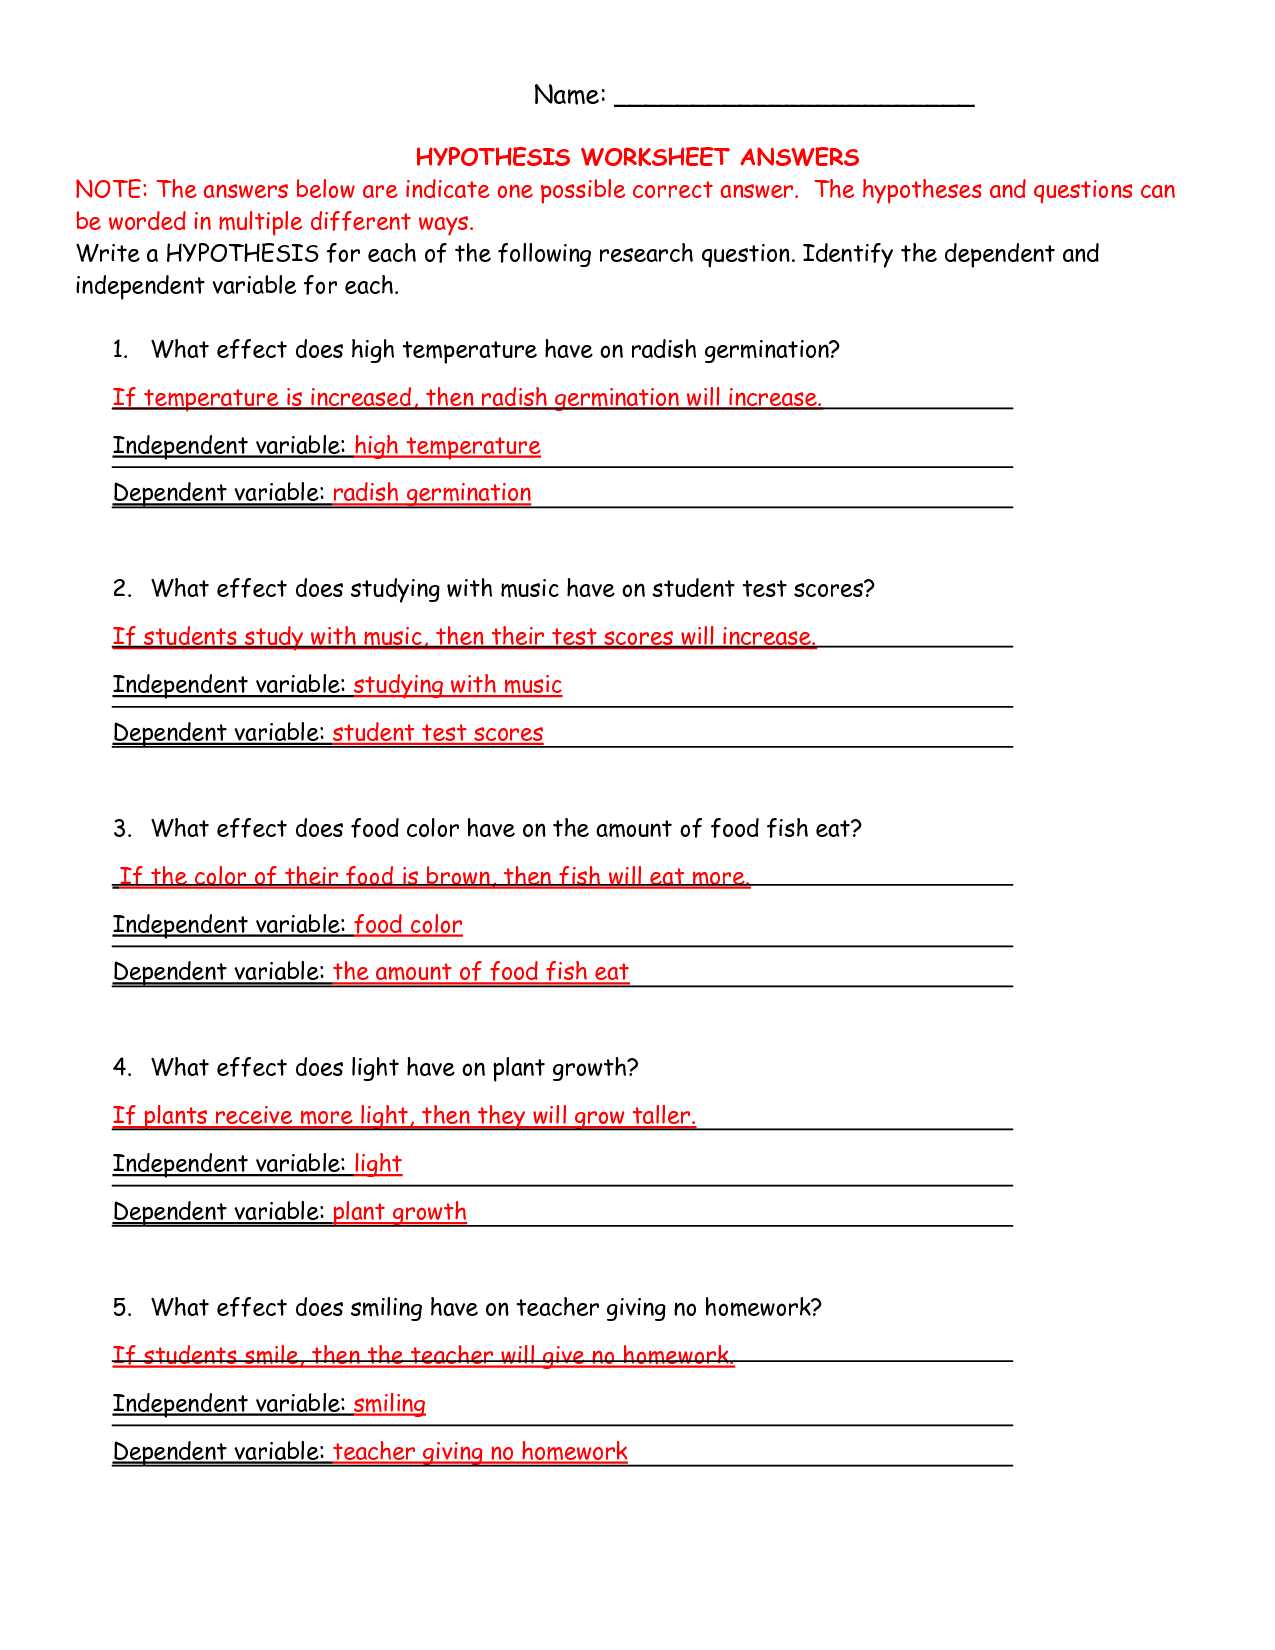 Worksheet 10 Metallic Bonds Answers with Ag Science Hypothesis Worksheet Answers Curriculum